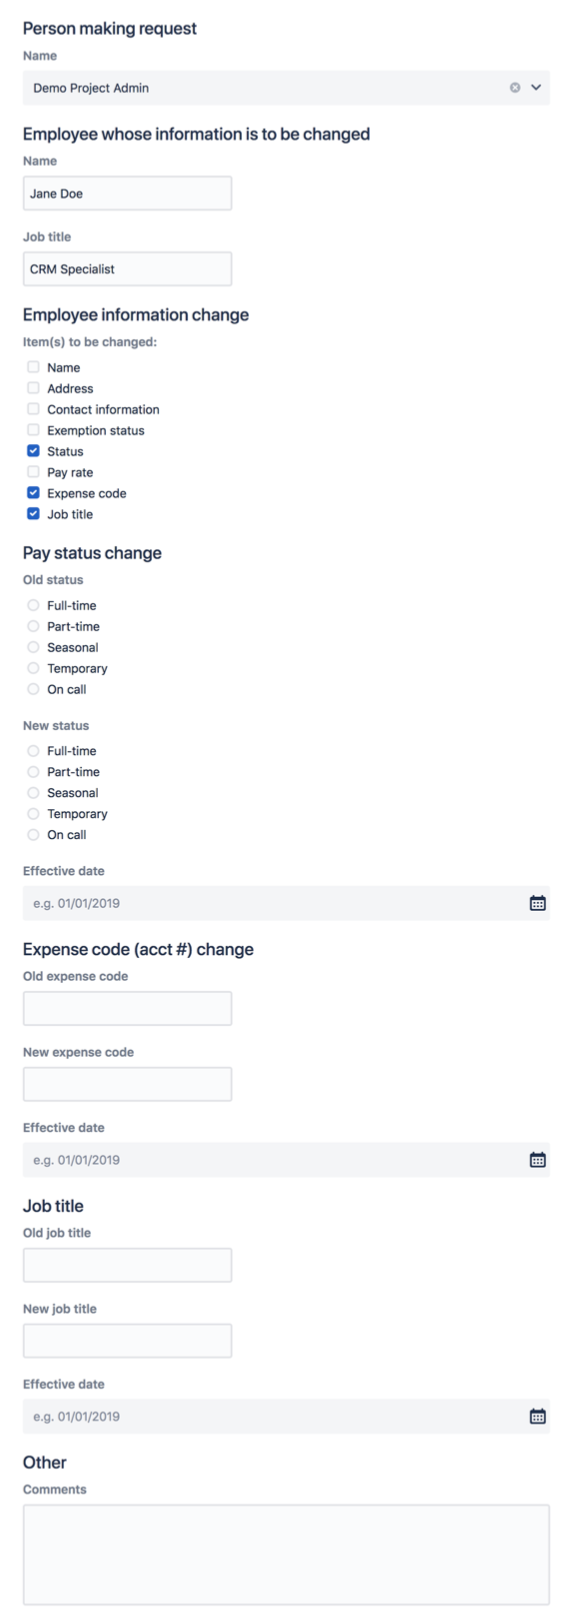 Example of a form in Jira Service Management using conditional logic